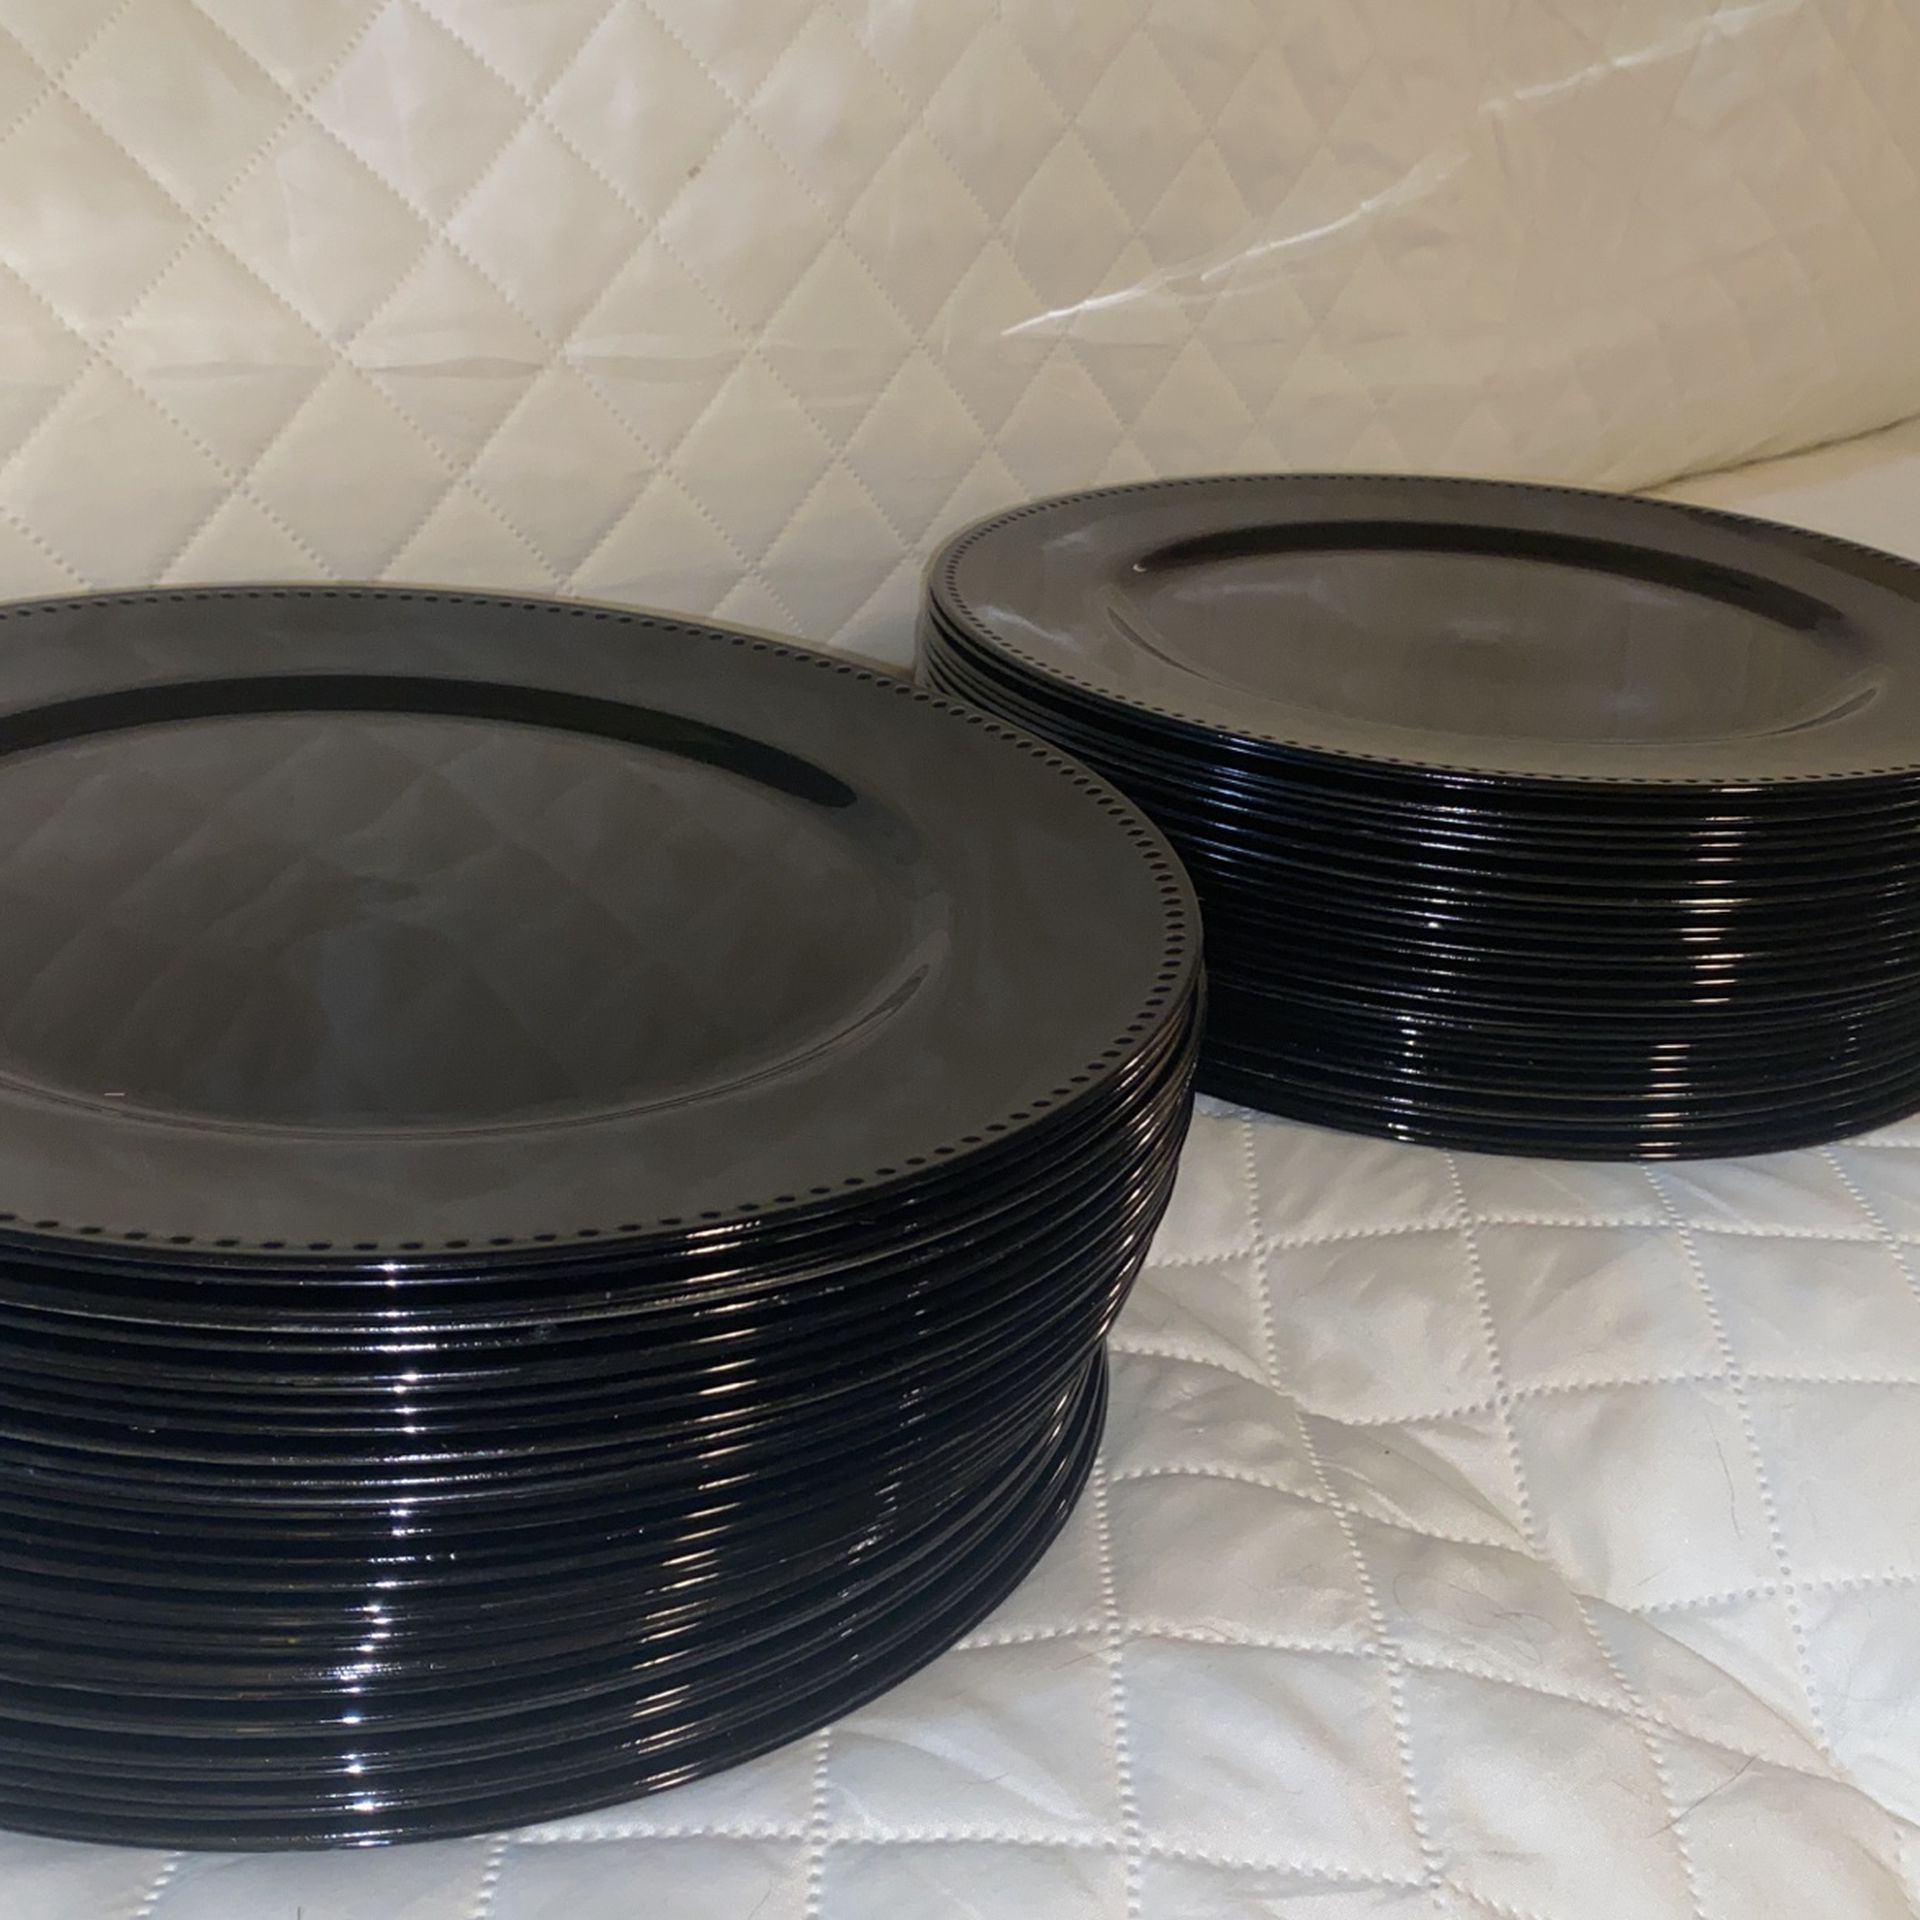 58 Black Plastic Chargers for any Event (13 Inches Wide)